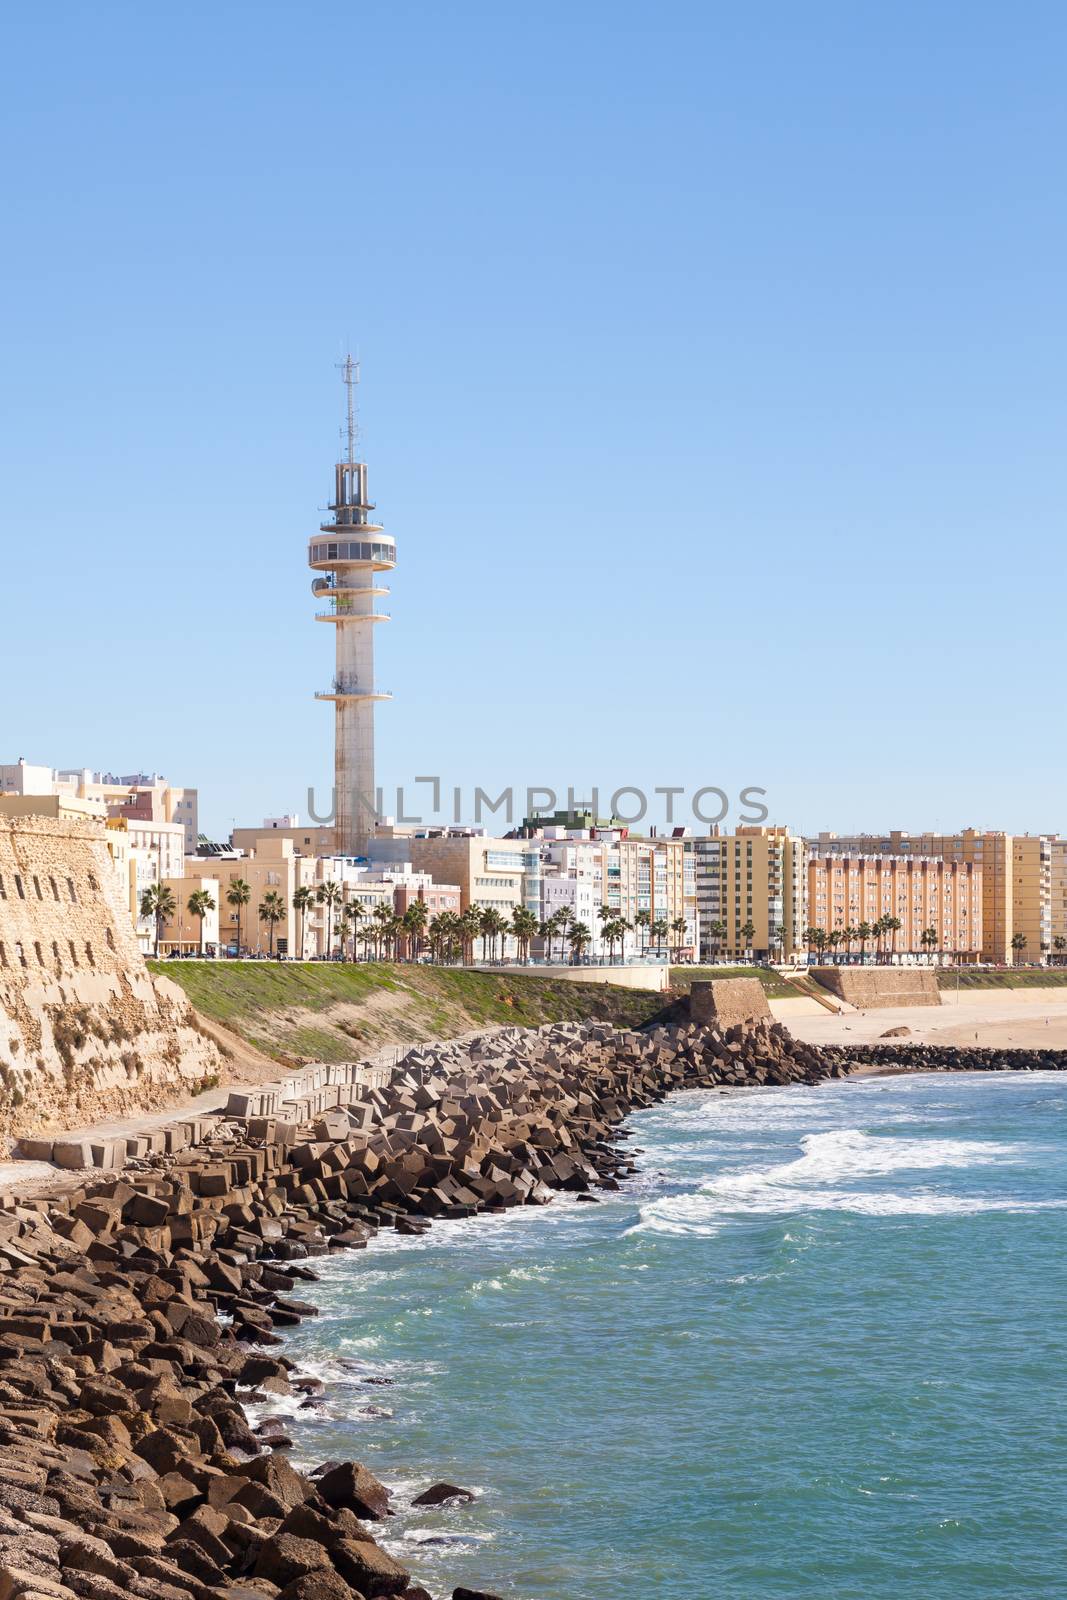 Cadiz waterfront in Spain and the view along the beach of Santa Maria del Mar.